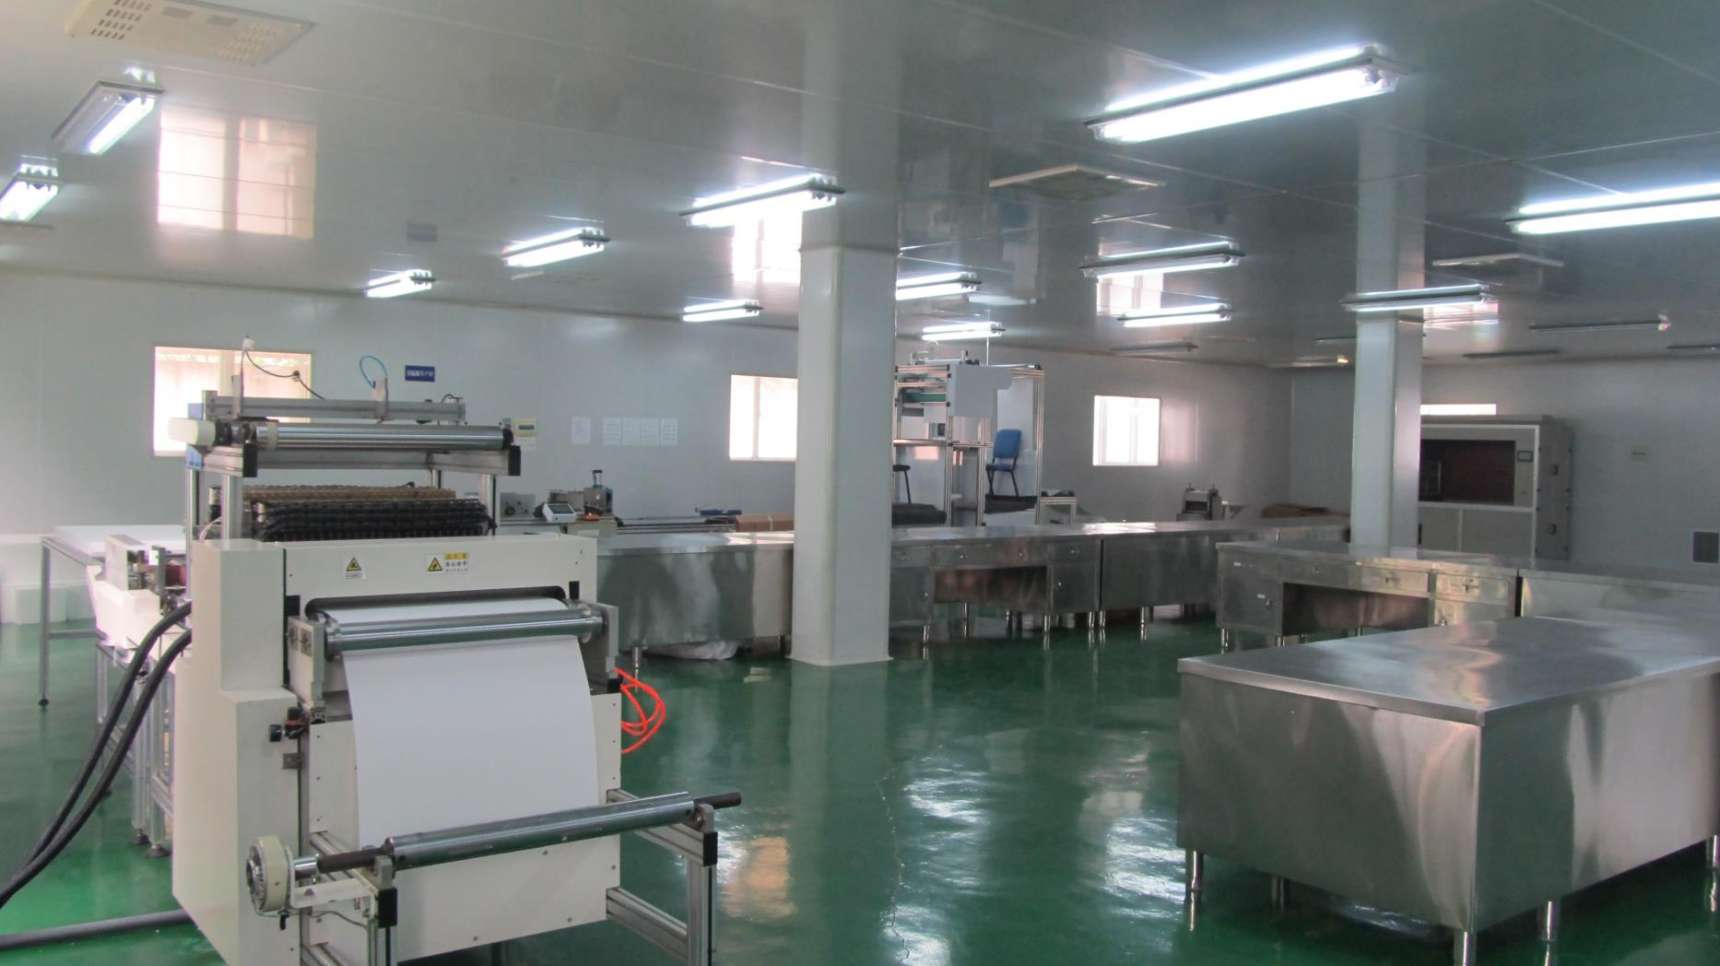 Applicable to laboratory, clean room, laboratory through box with interlock